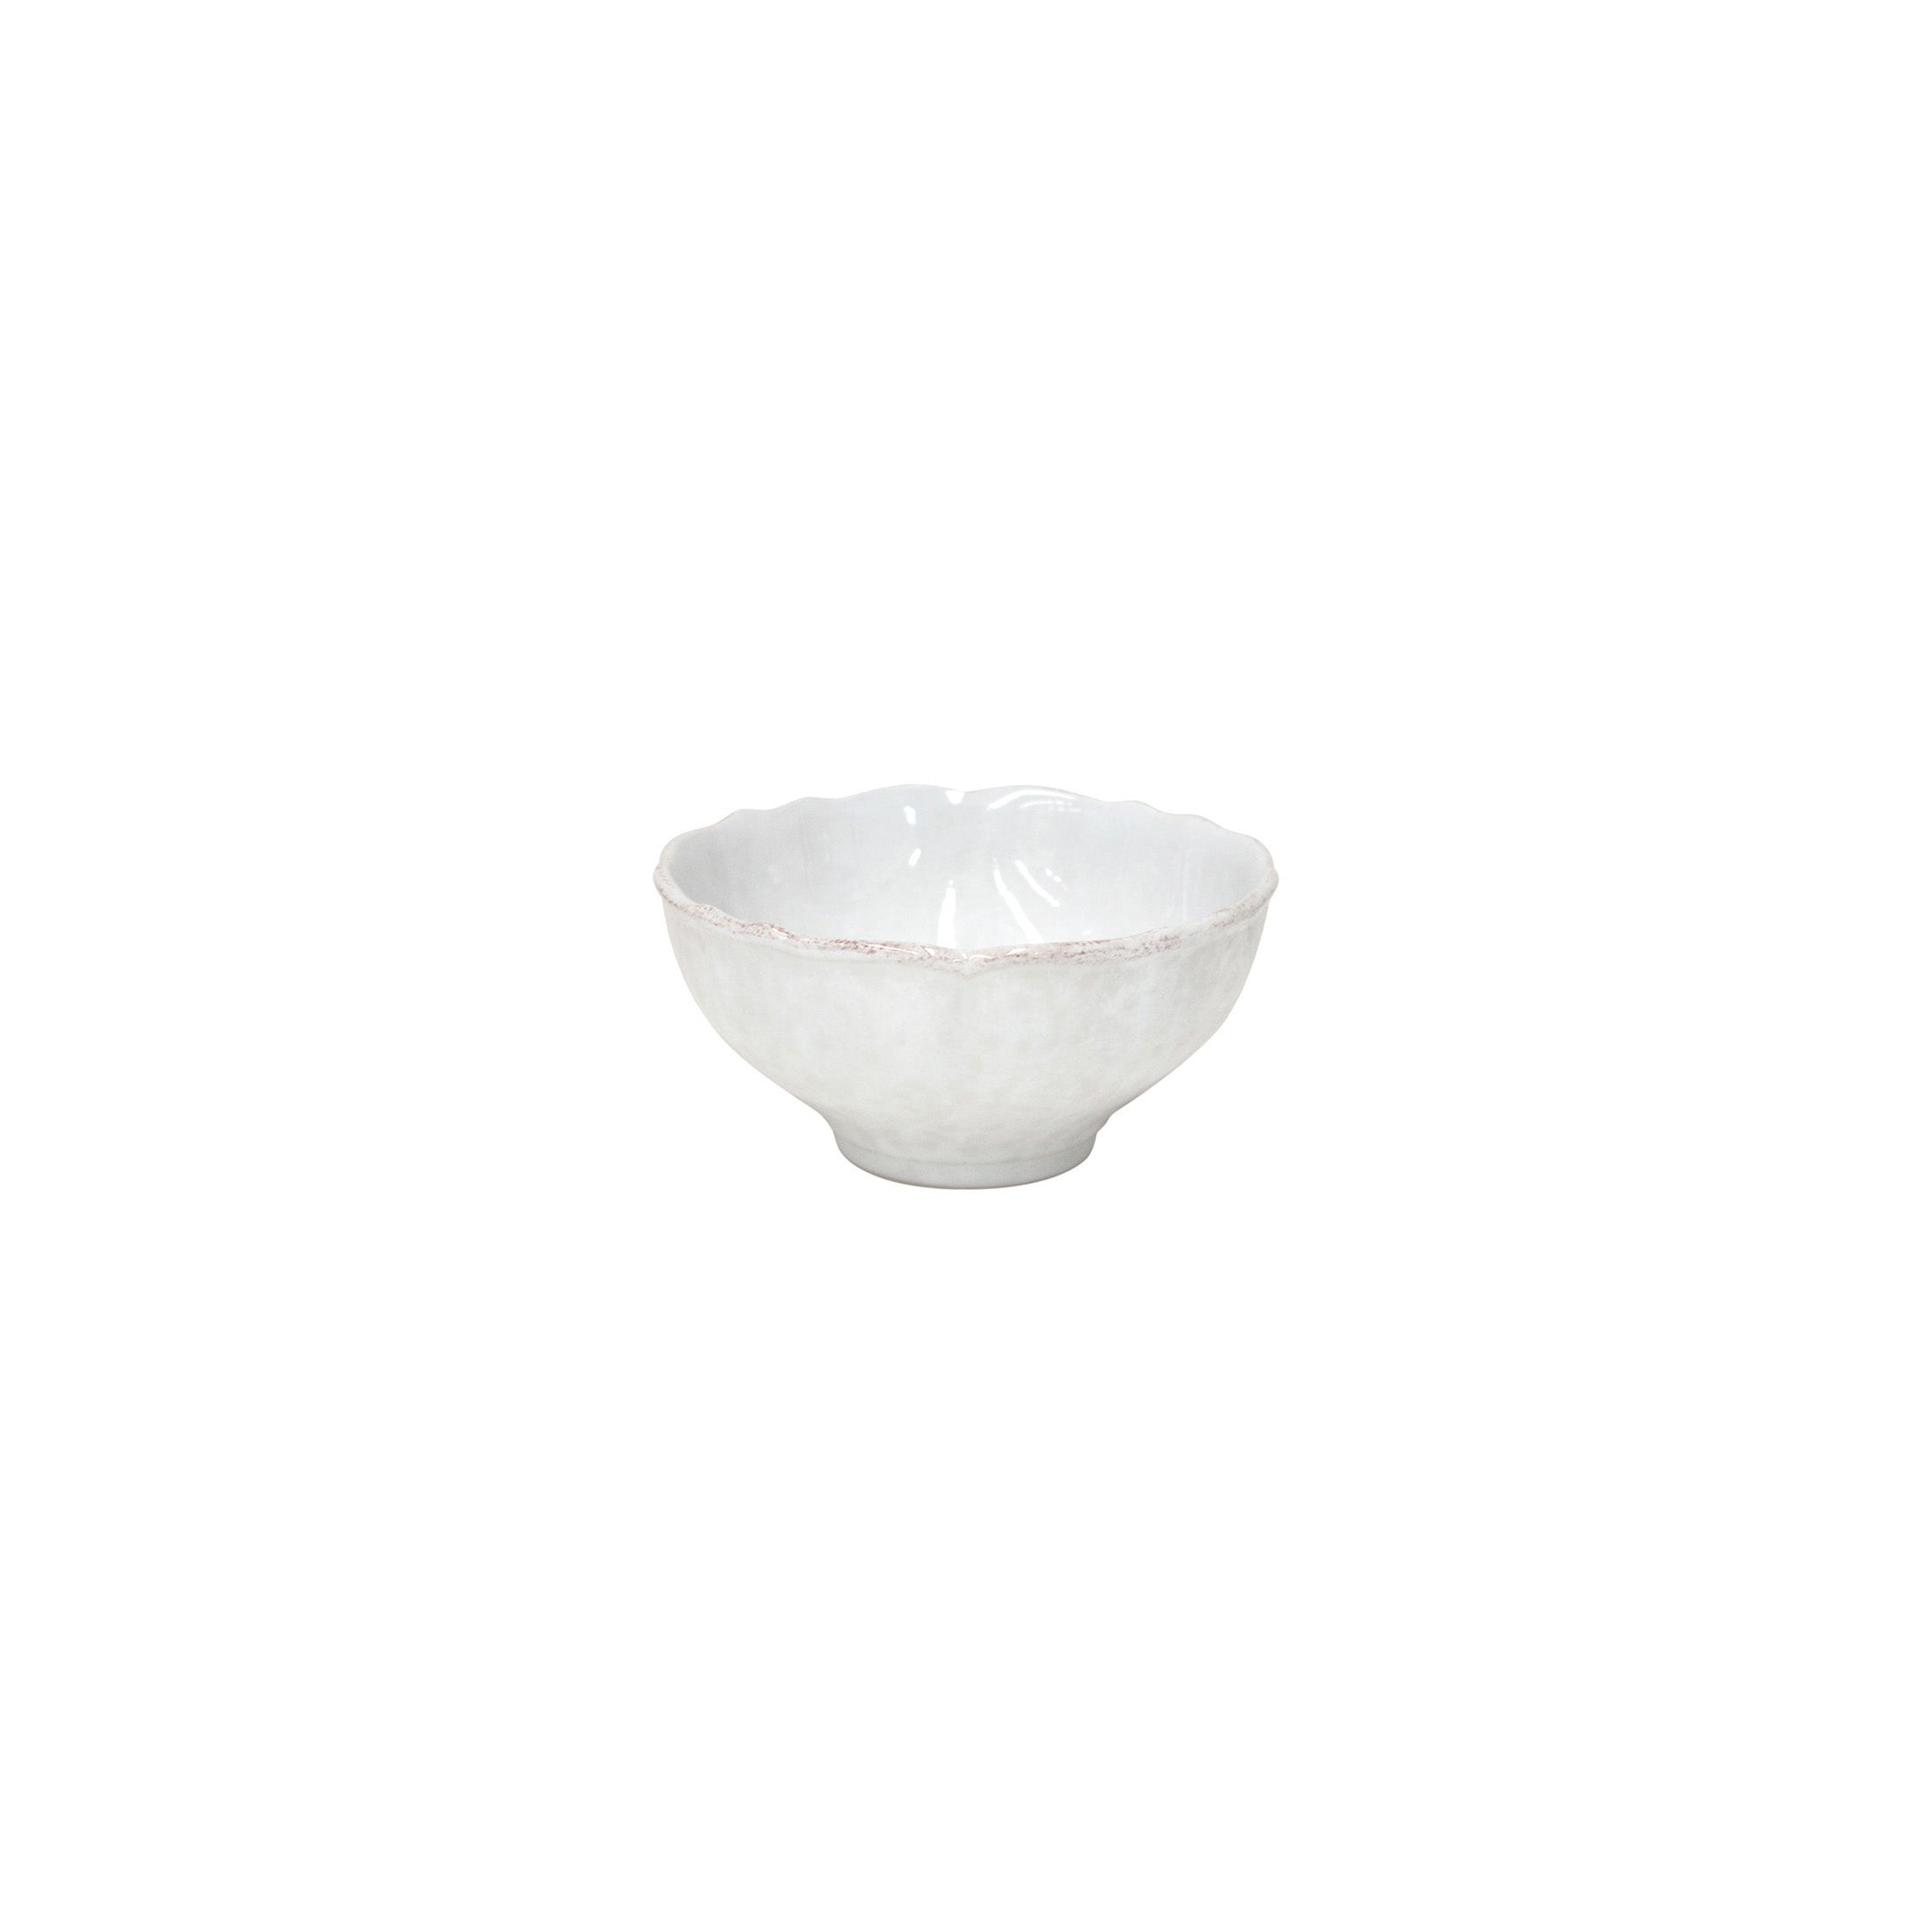 Impressions Soup/Cereal Bowl White